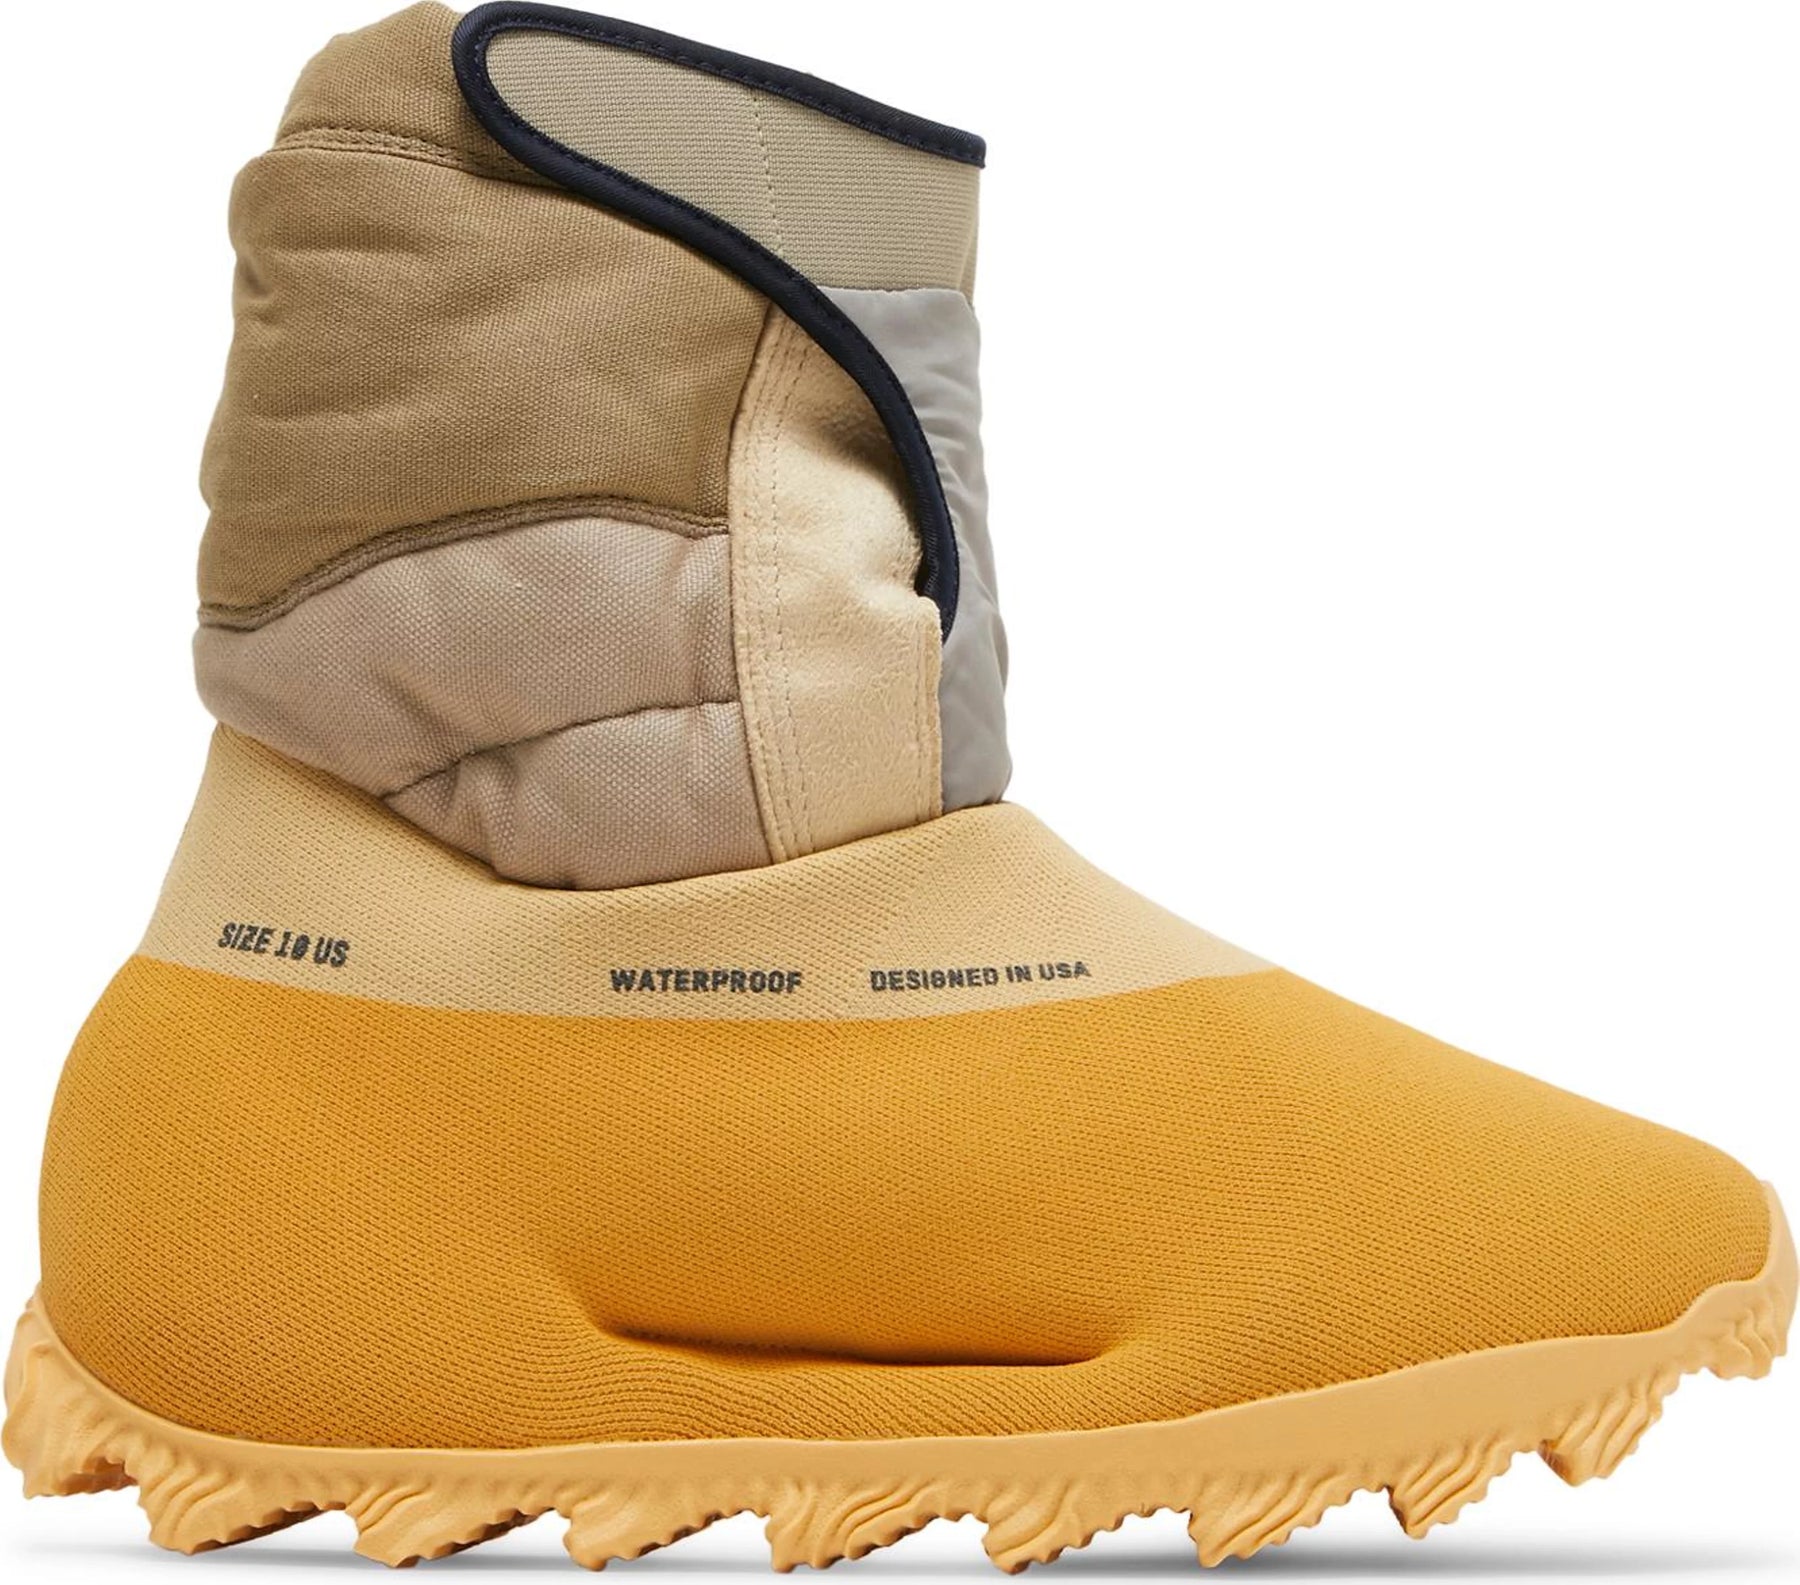 Adidas Yeezy Knit RNR Boot Sulfur (Preowned)